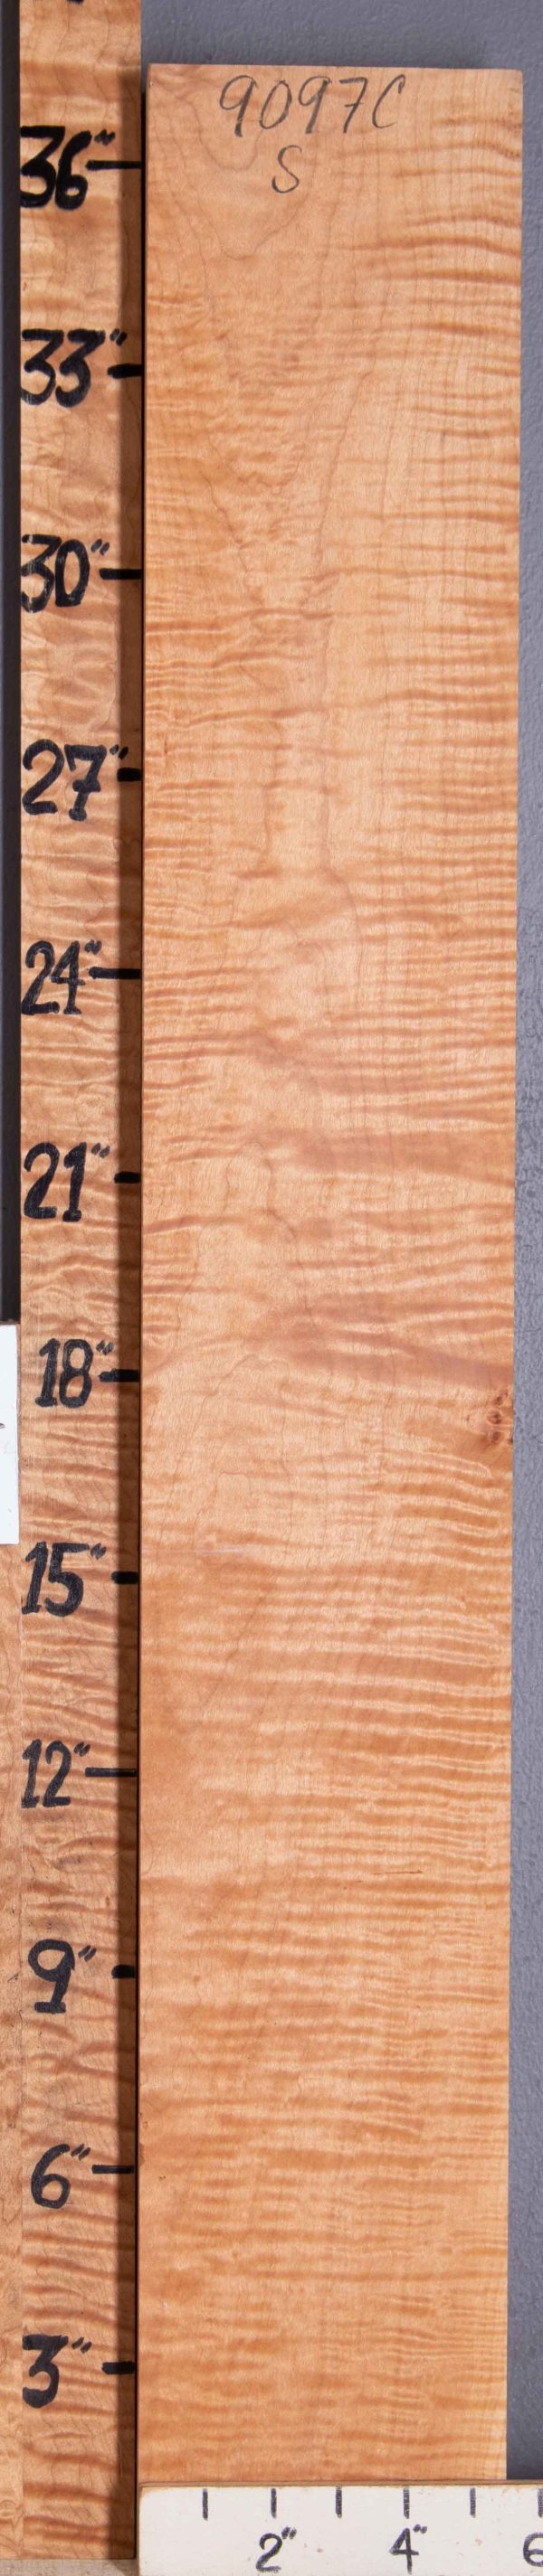 Musical Curly Maple Side Billet 5"1/2 X 37" X 1"1/2 (NWT-9097C)